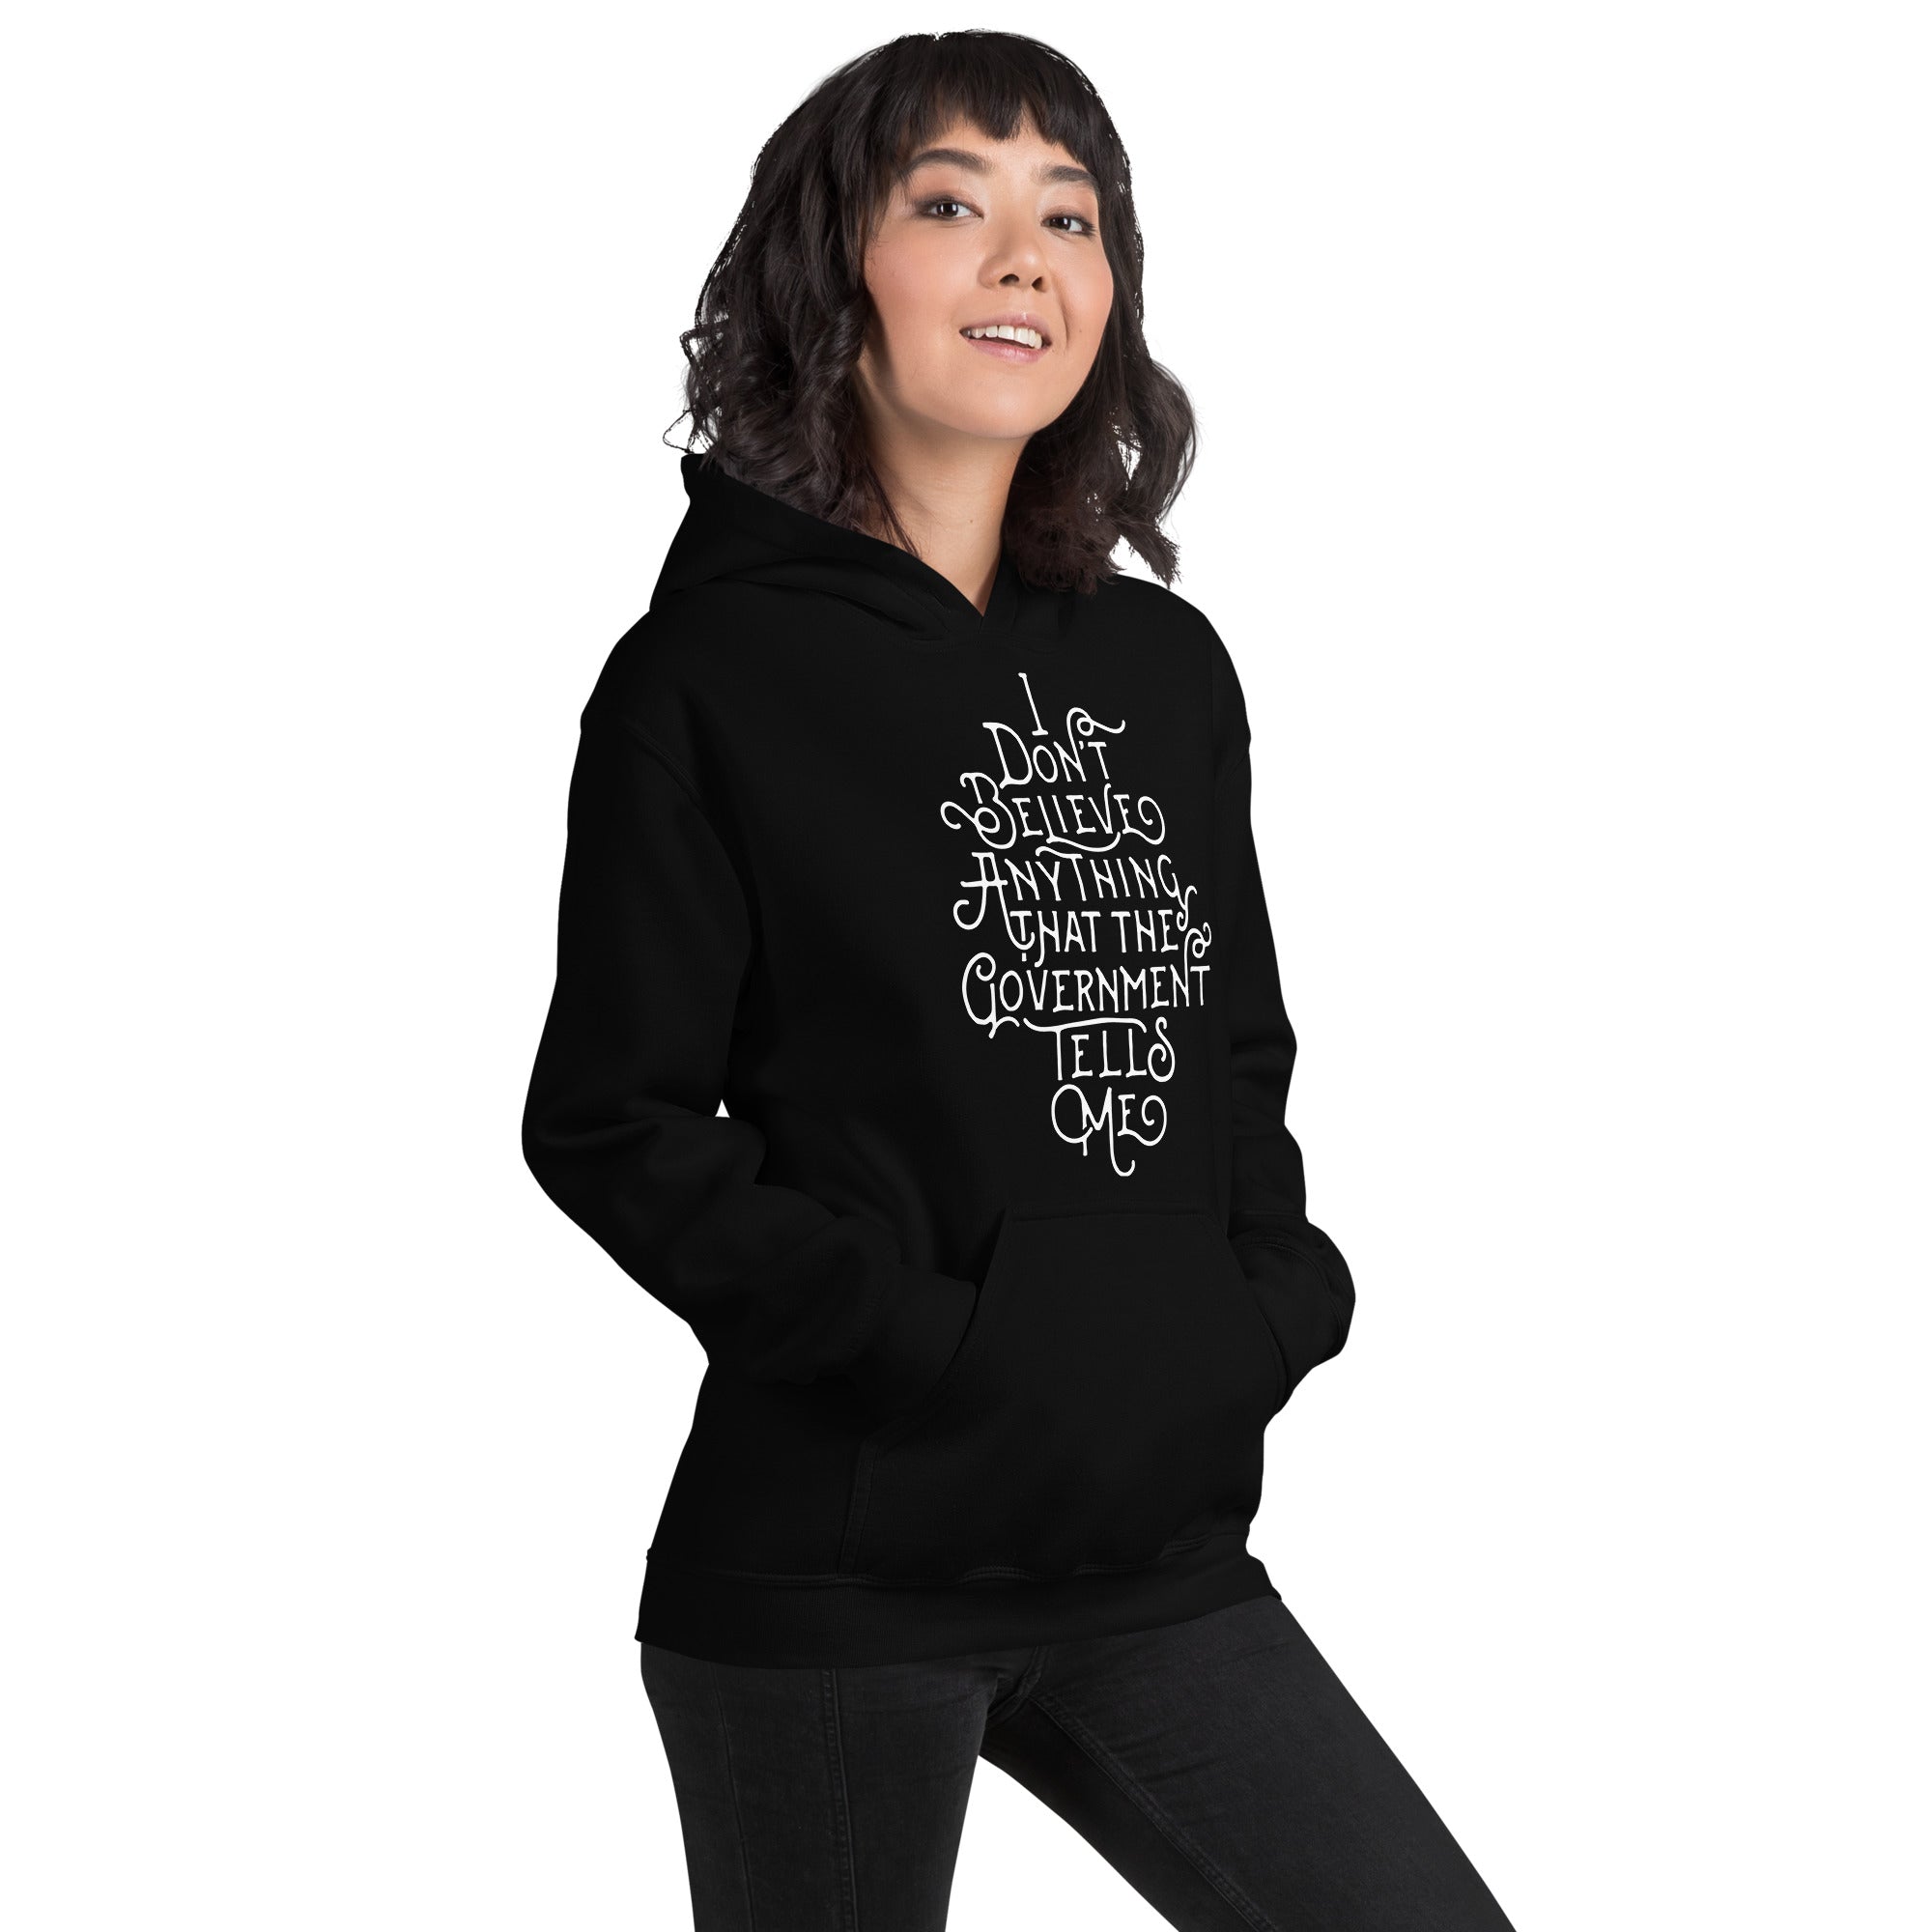 I Don't Believe Anything That The Government Tells Me Unisex Hoodie